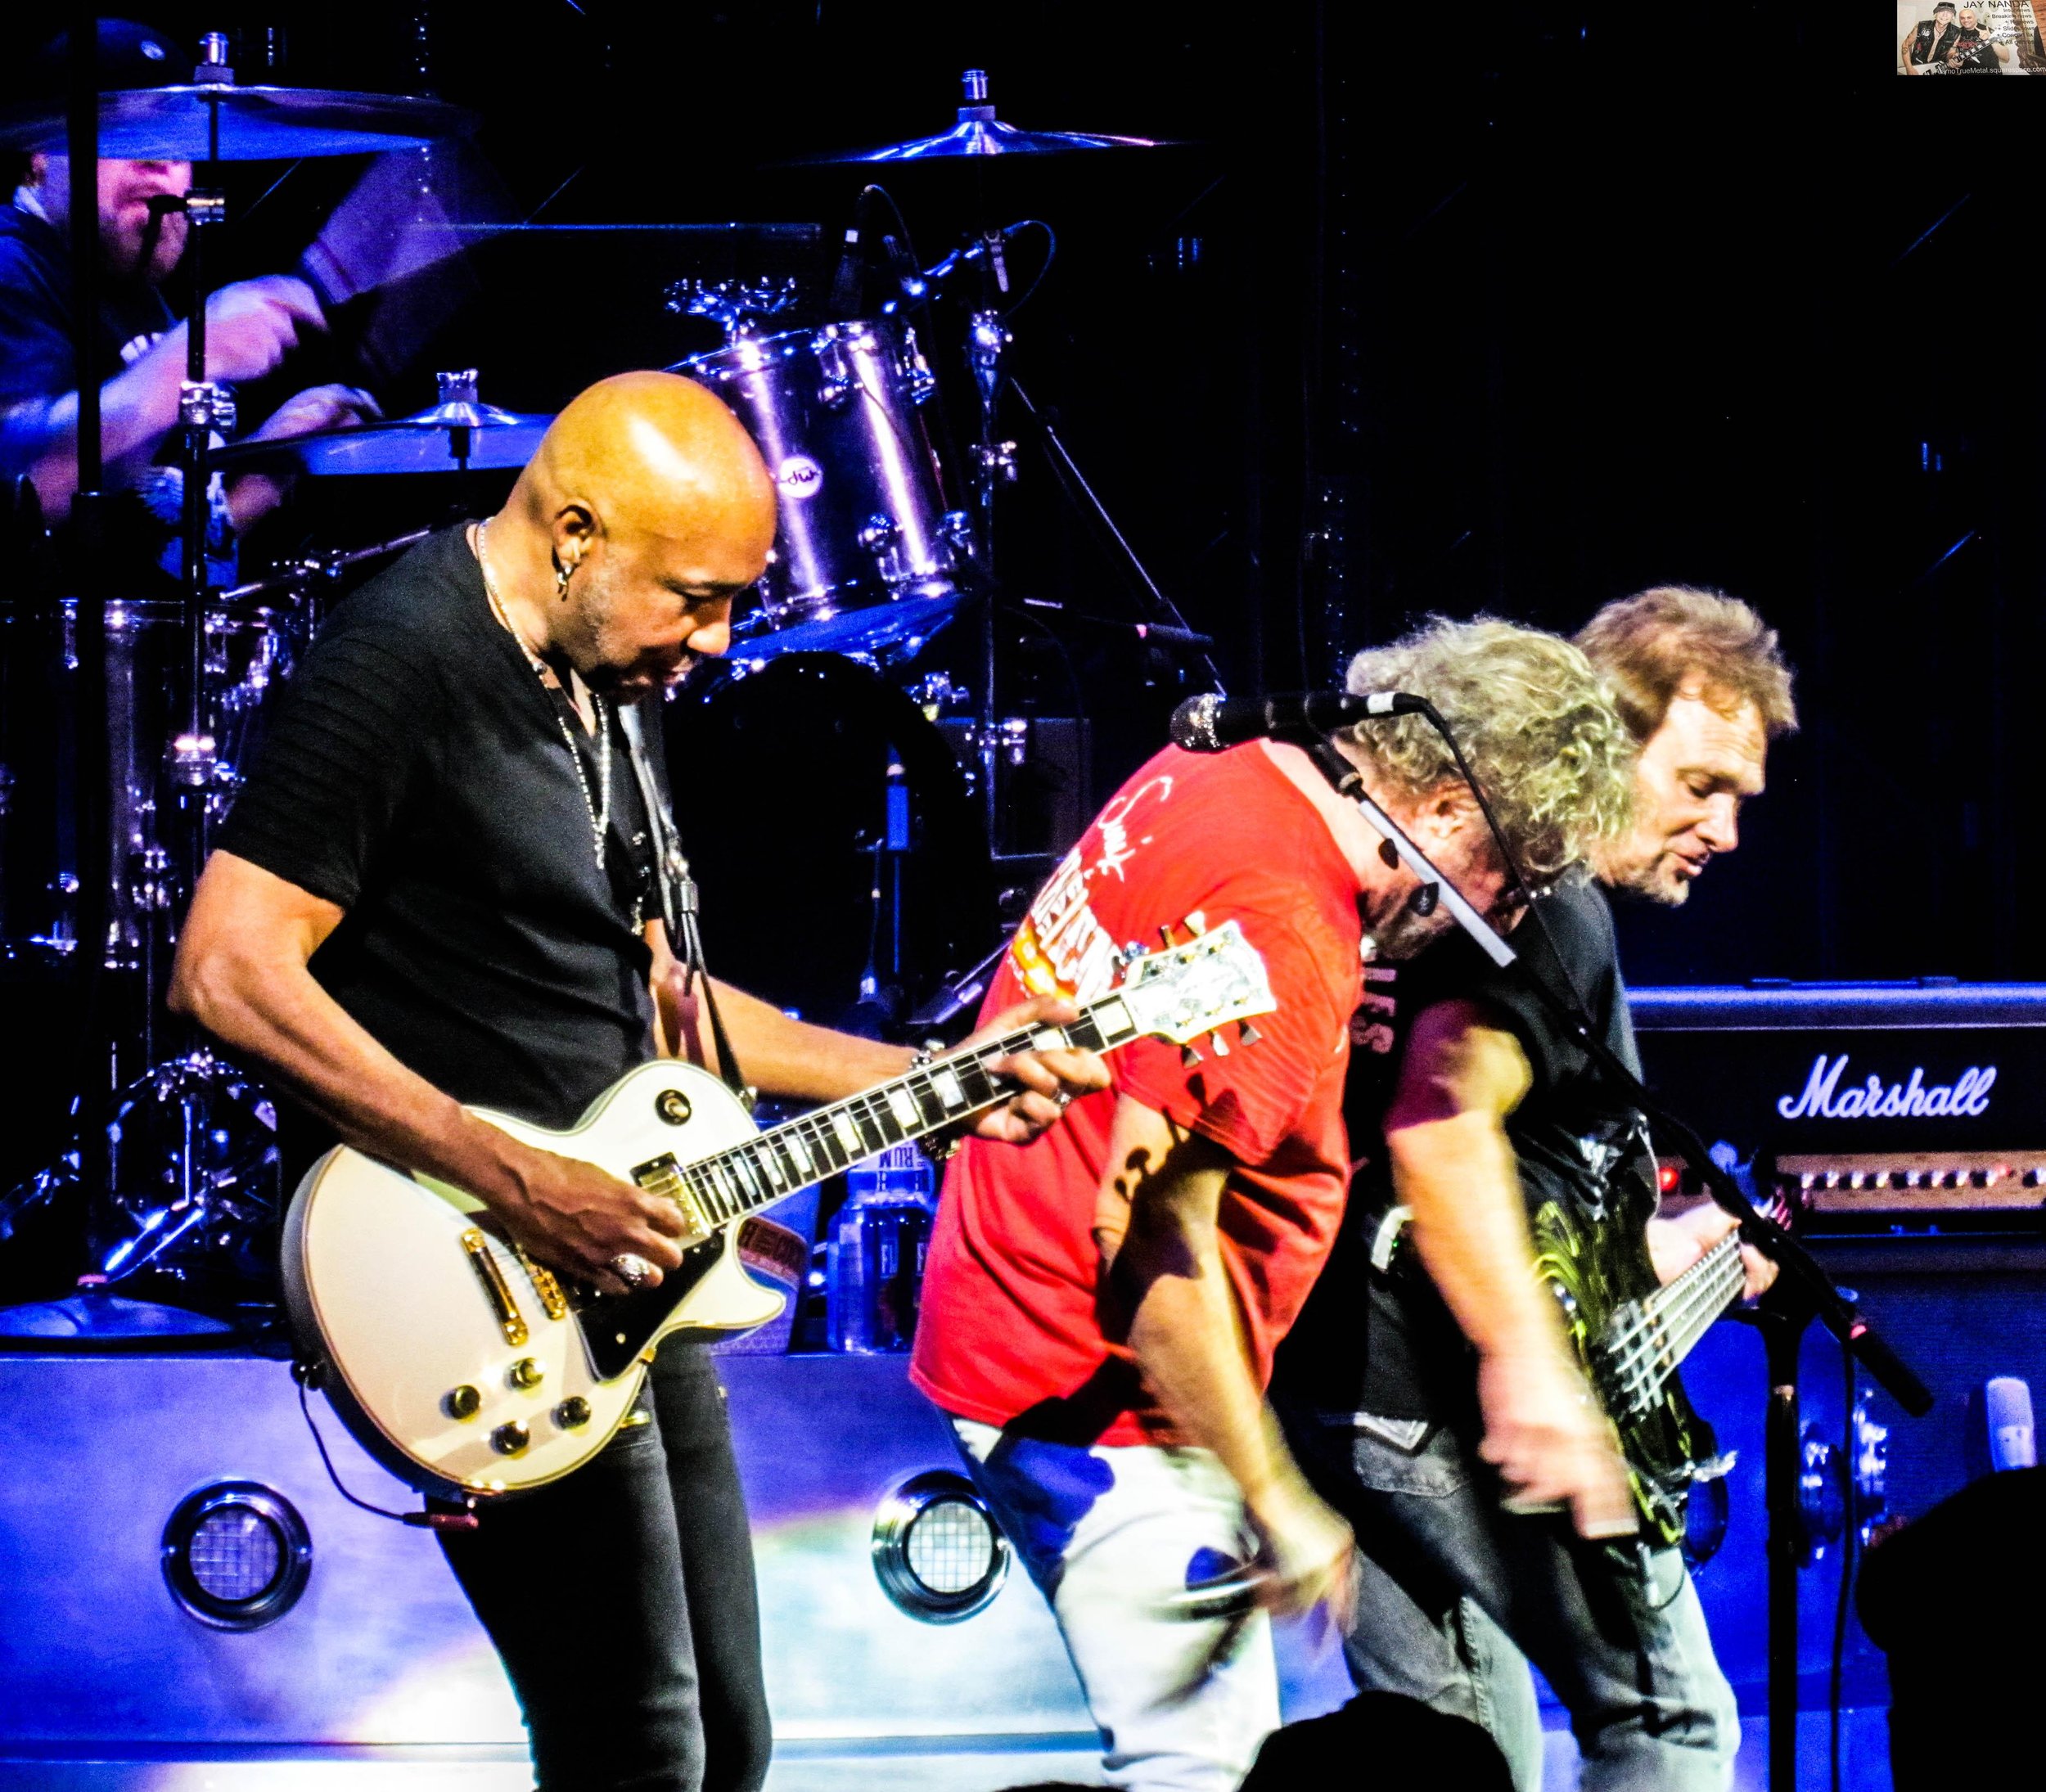  Hagar and Anthony begin their 5150 strut during “Best of Both Worlds” as Johnson plays a riff. 